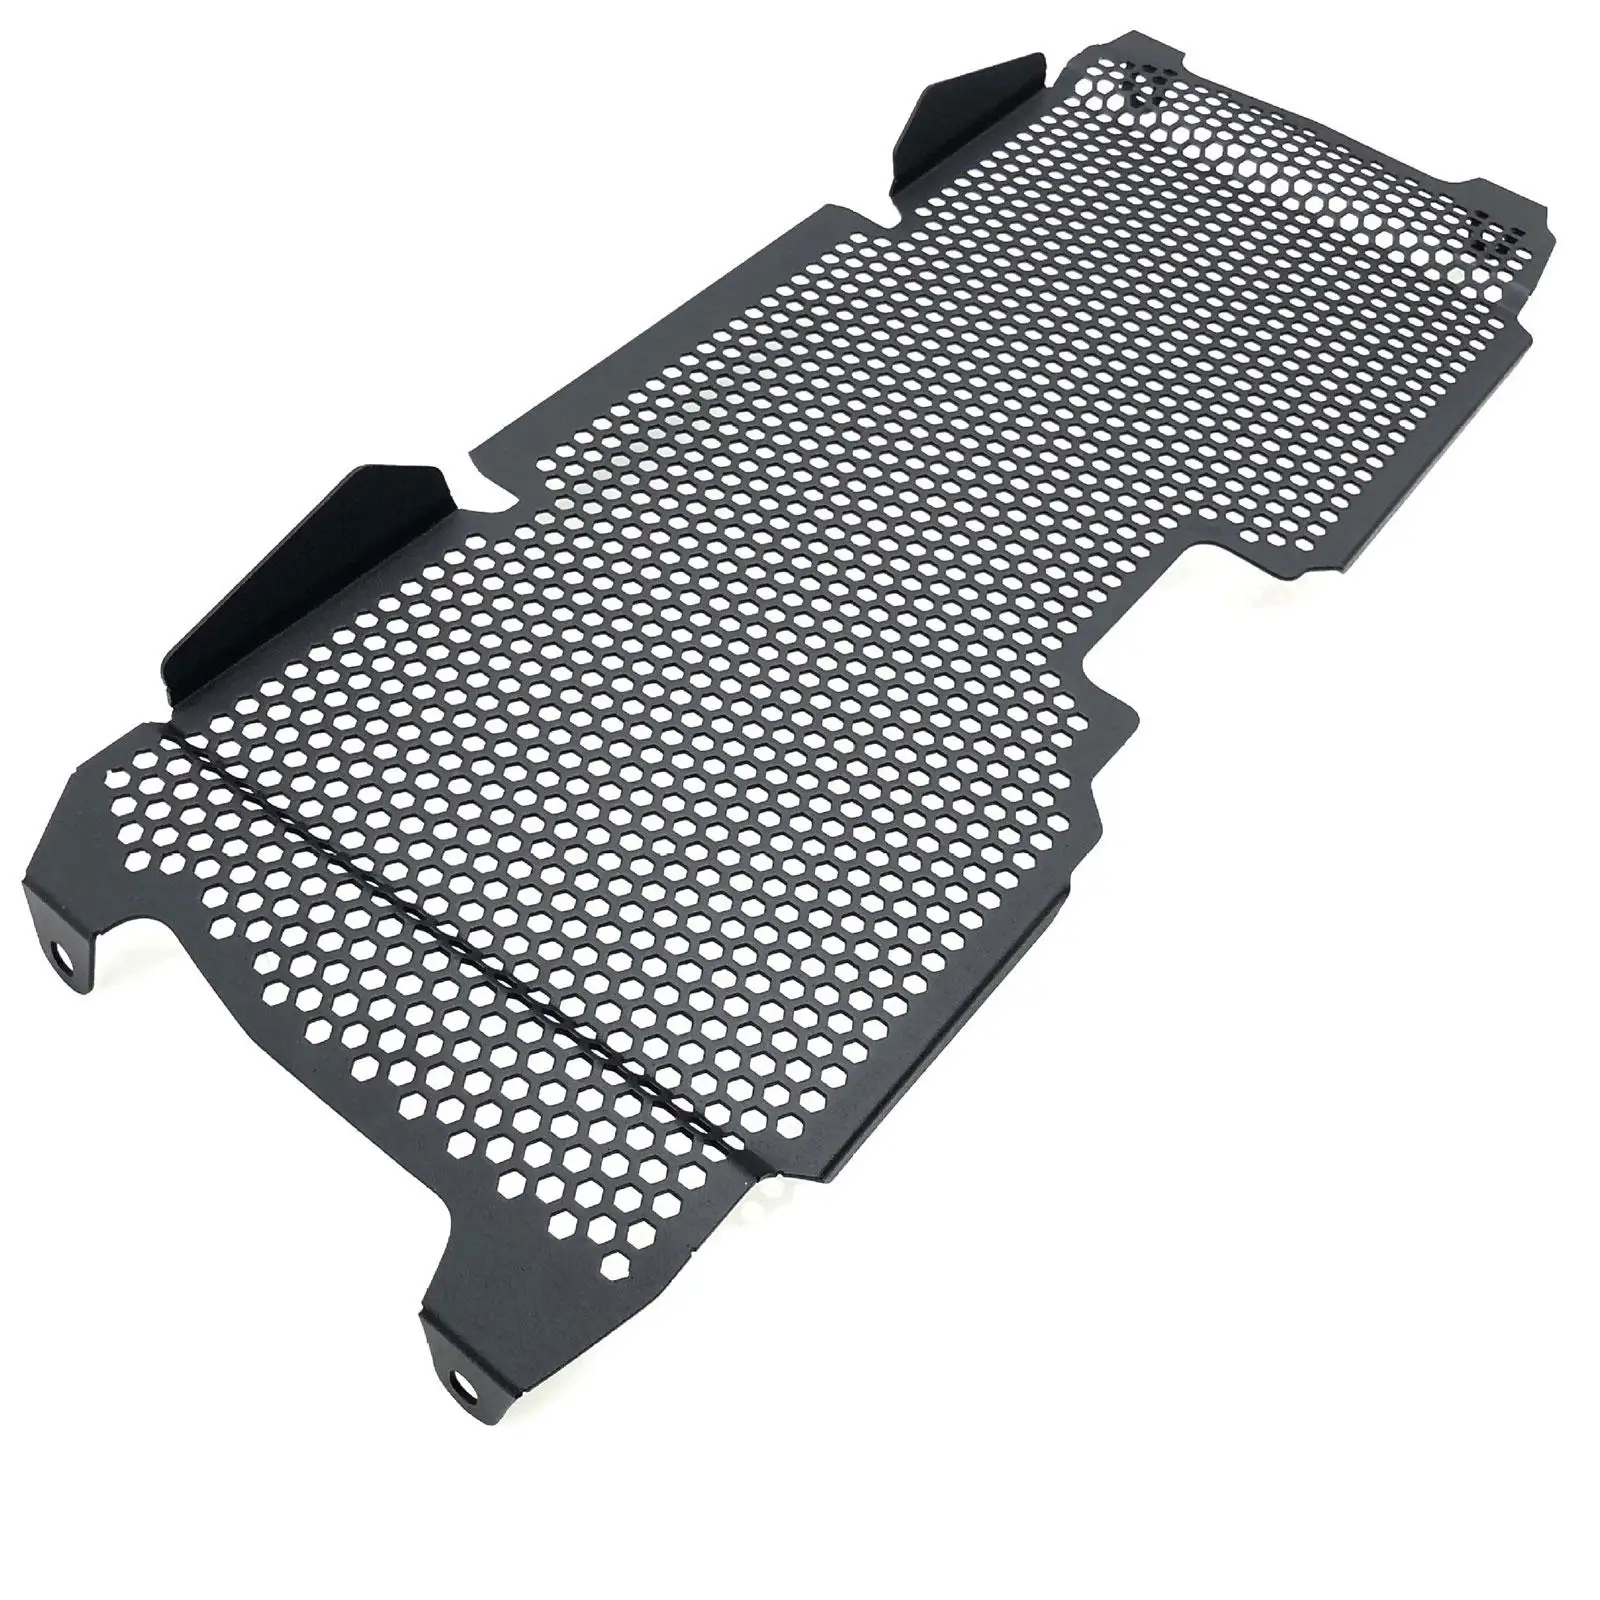 Radiator Guard Grille Protector Easy to Install for BMW R1200RS 2015-2018